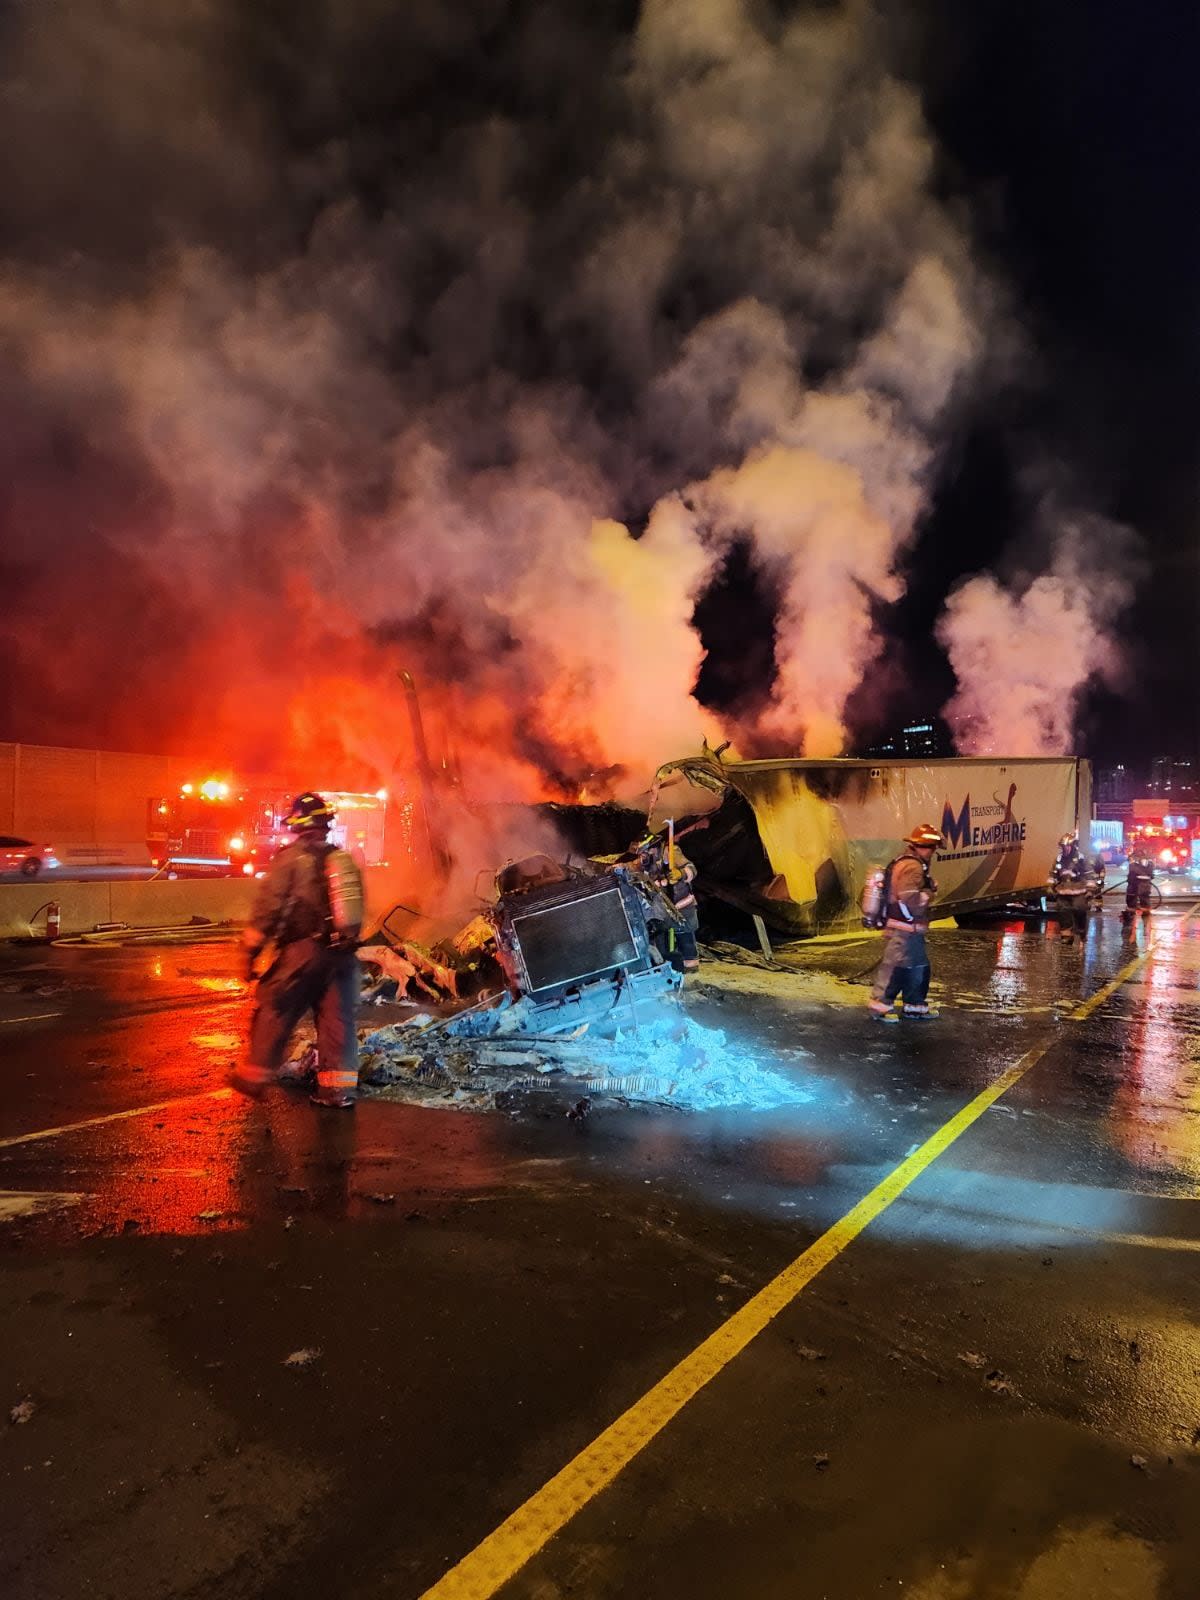 The driver of a transport truck loaded with cardboard collided with a guard rail on Highway 401 overnight, causing the truck to catch fire. (@OPP_HSD/Twitter - image credit)